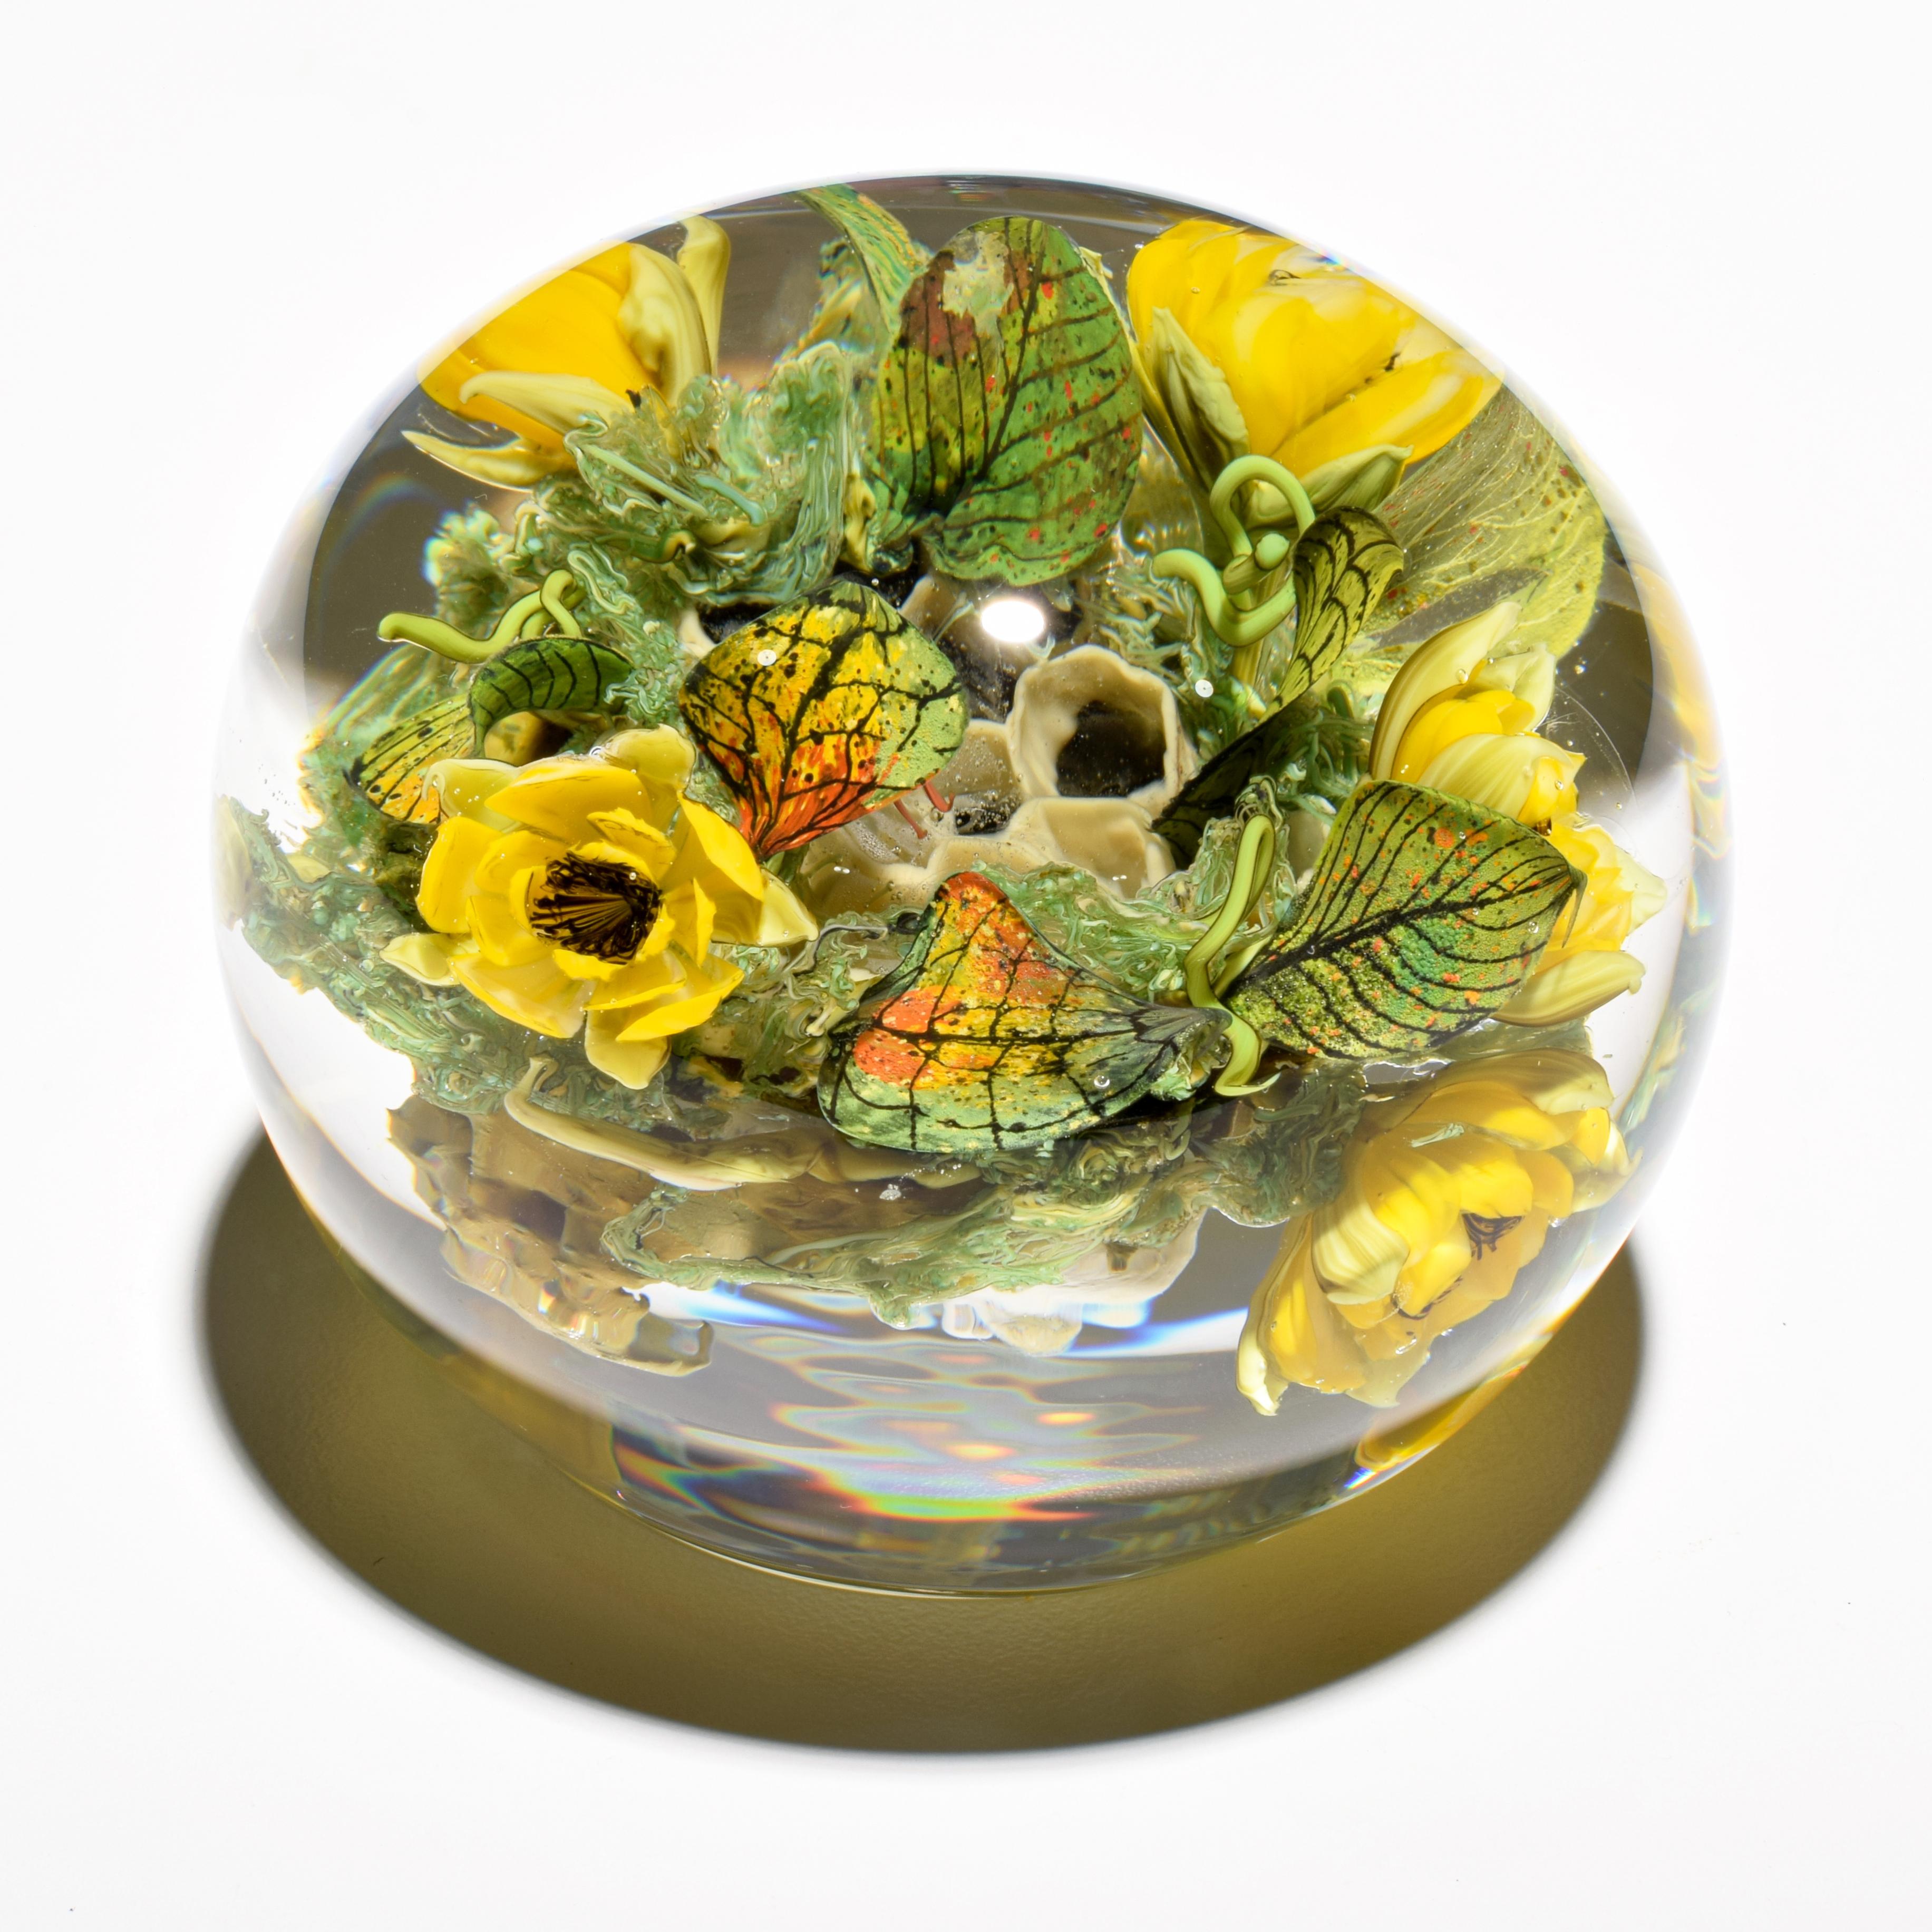 Paul J. Stankard Honeycomb, Flowers & Mask Oblate Paperweight - Contemporary Art by Paul Stankard